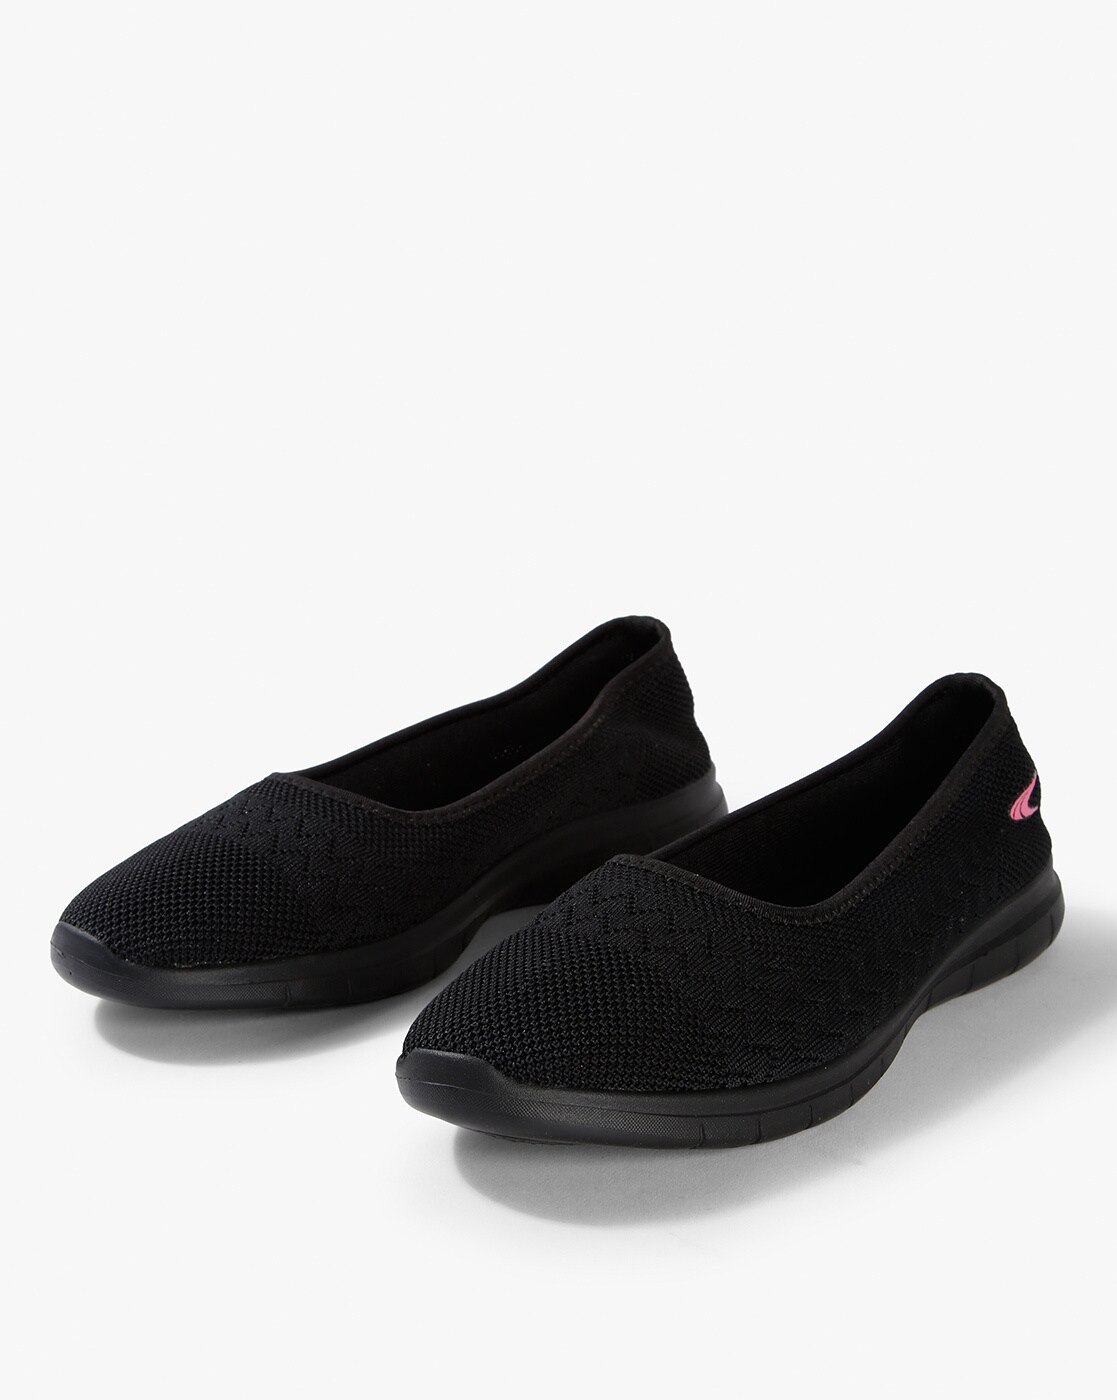 performax slip on shoes